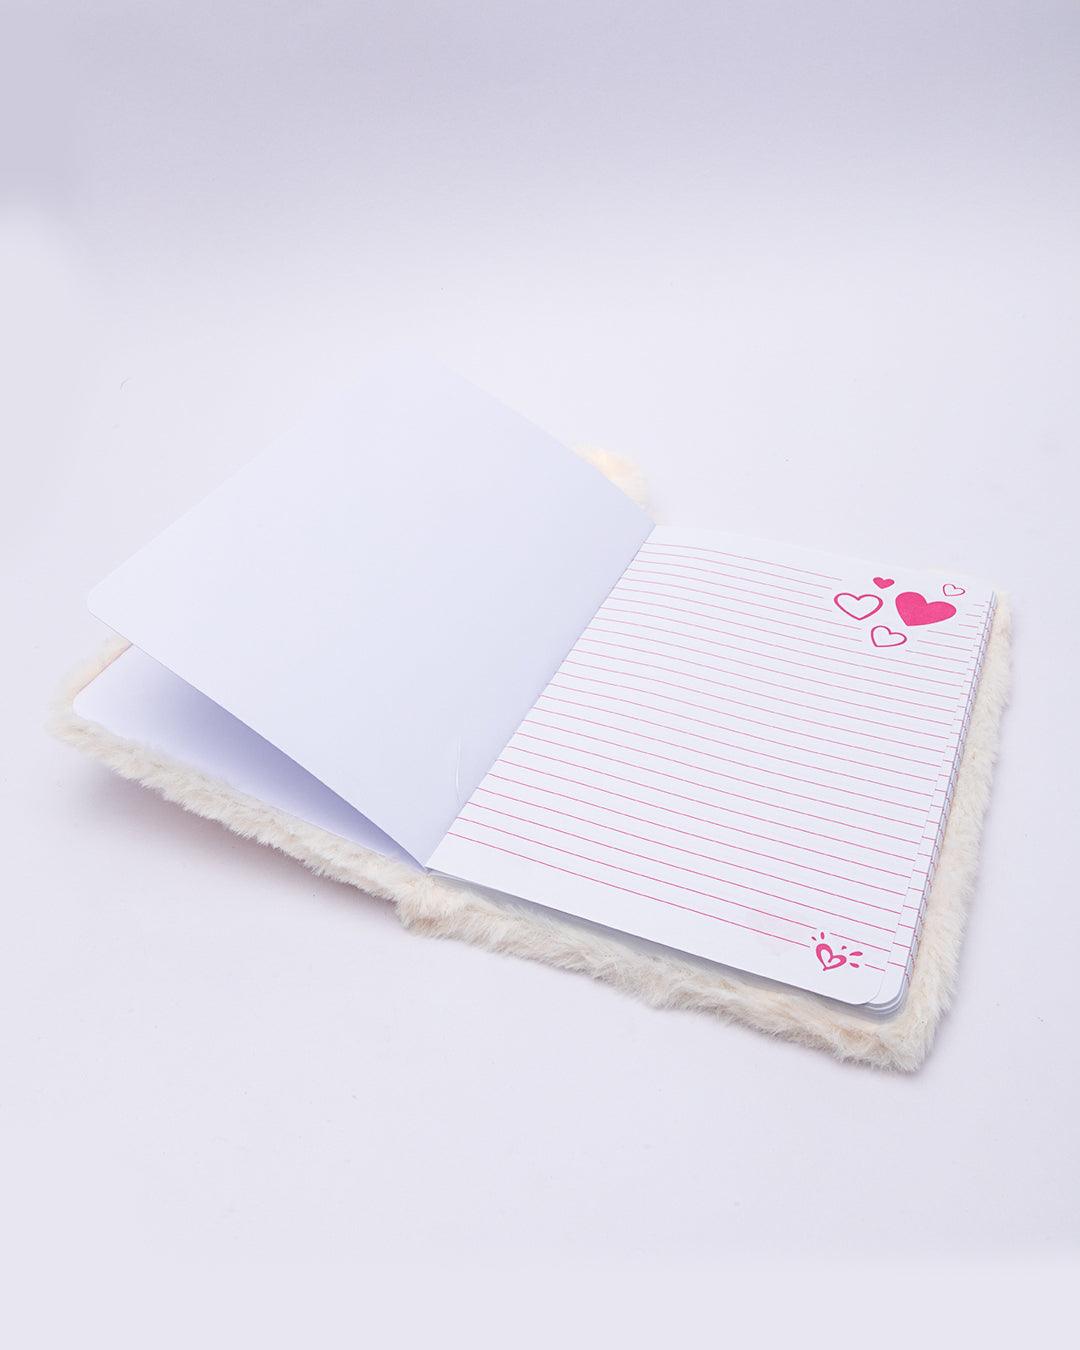 Notebook, Animal Design Shaped, Feather Material, Pink, Paper - MARKET 99